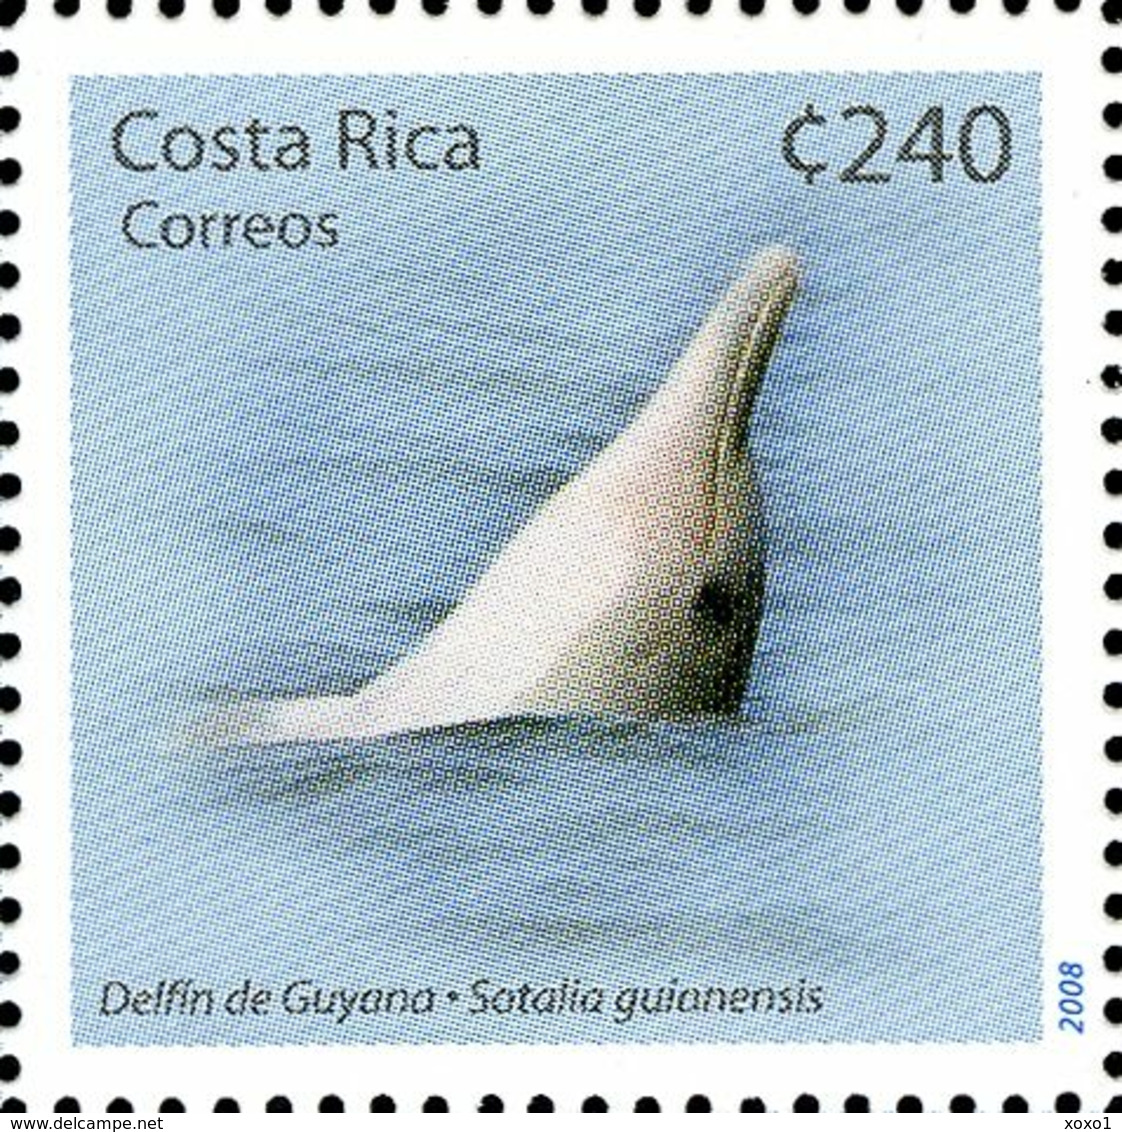 Costa Rica 2008 MiNr. 1701 - 1704 (Block 26) Whales Dolphins 1bl MNH** 19,00 € - Dolphins